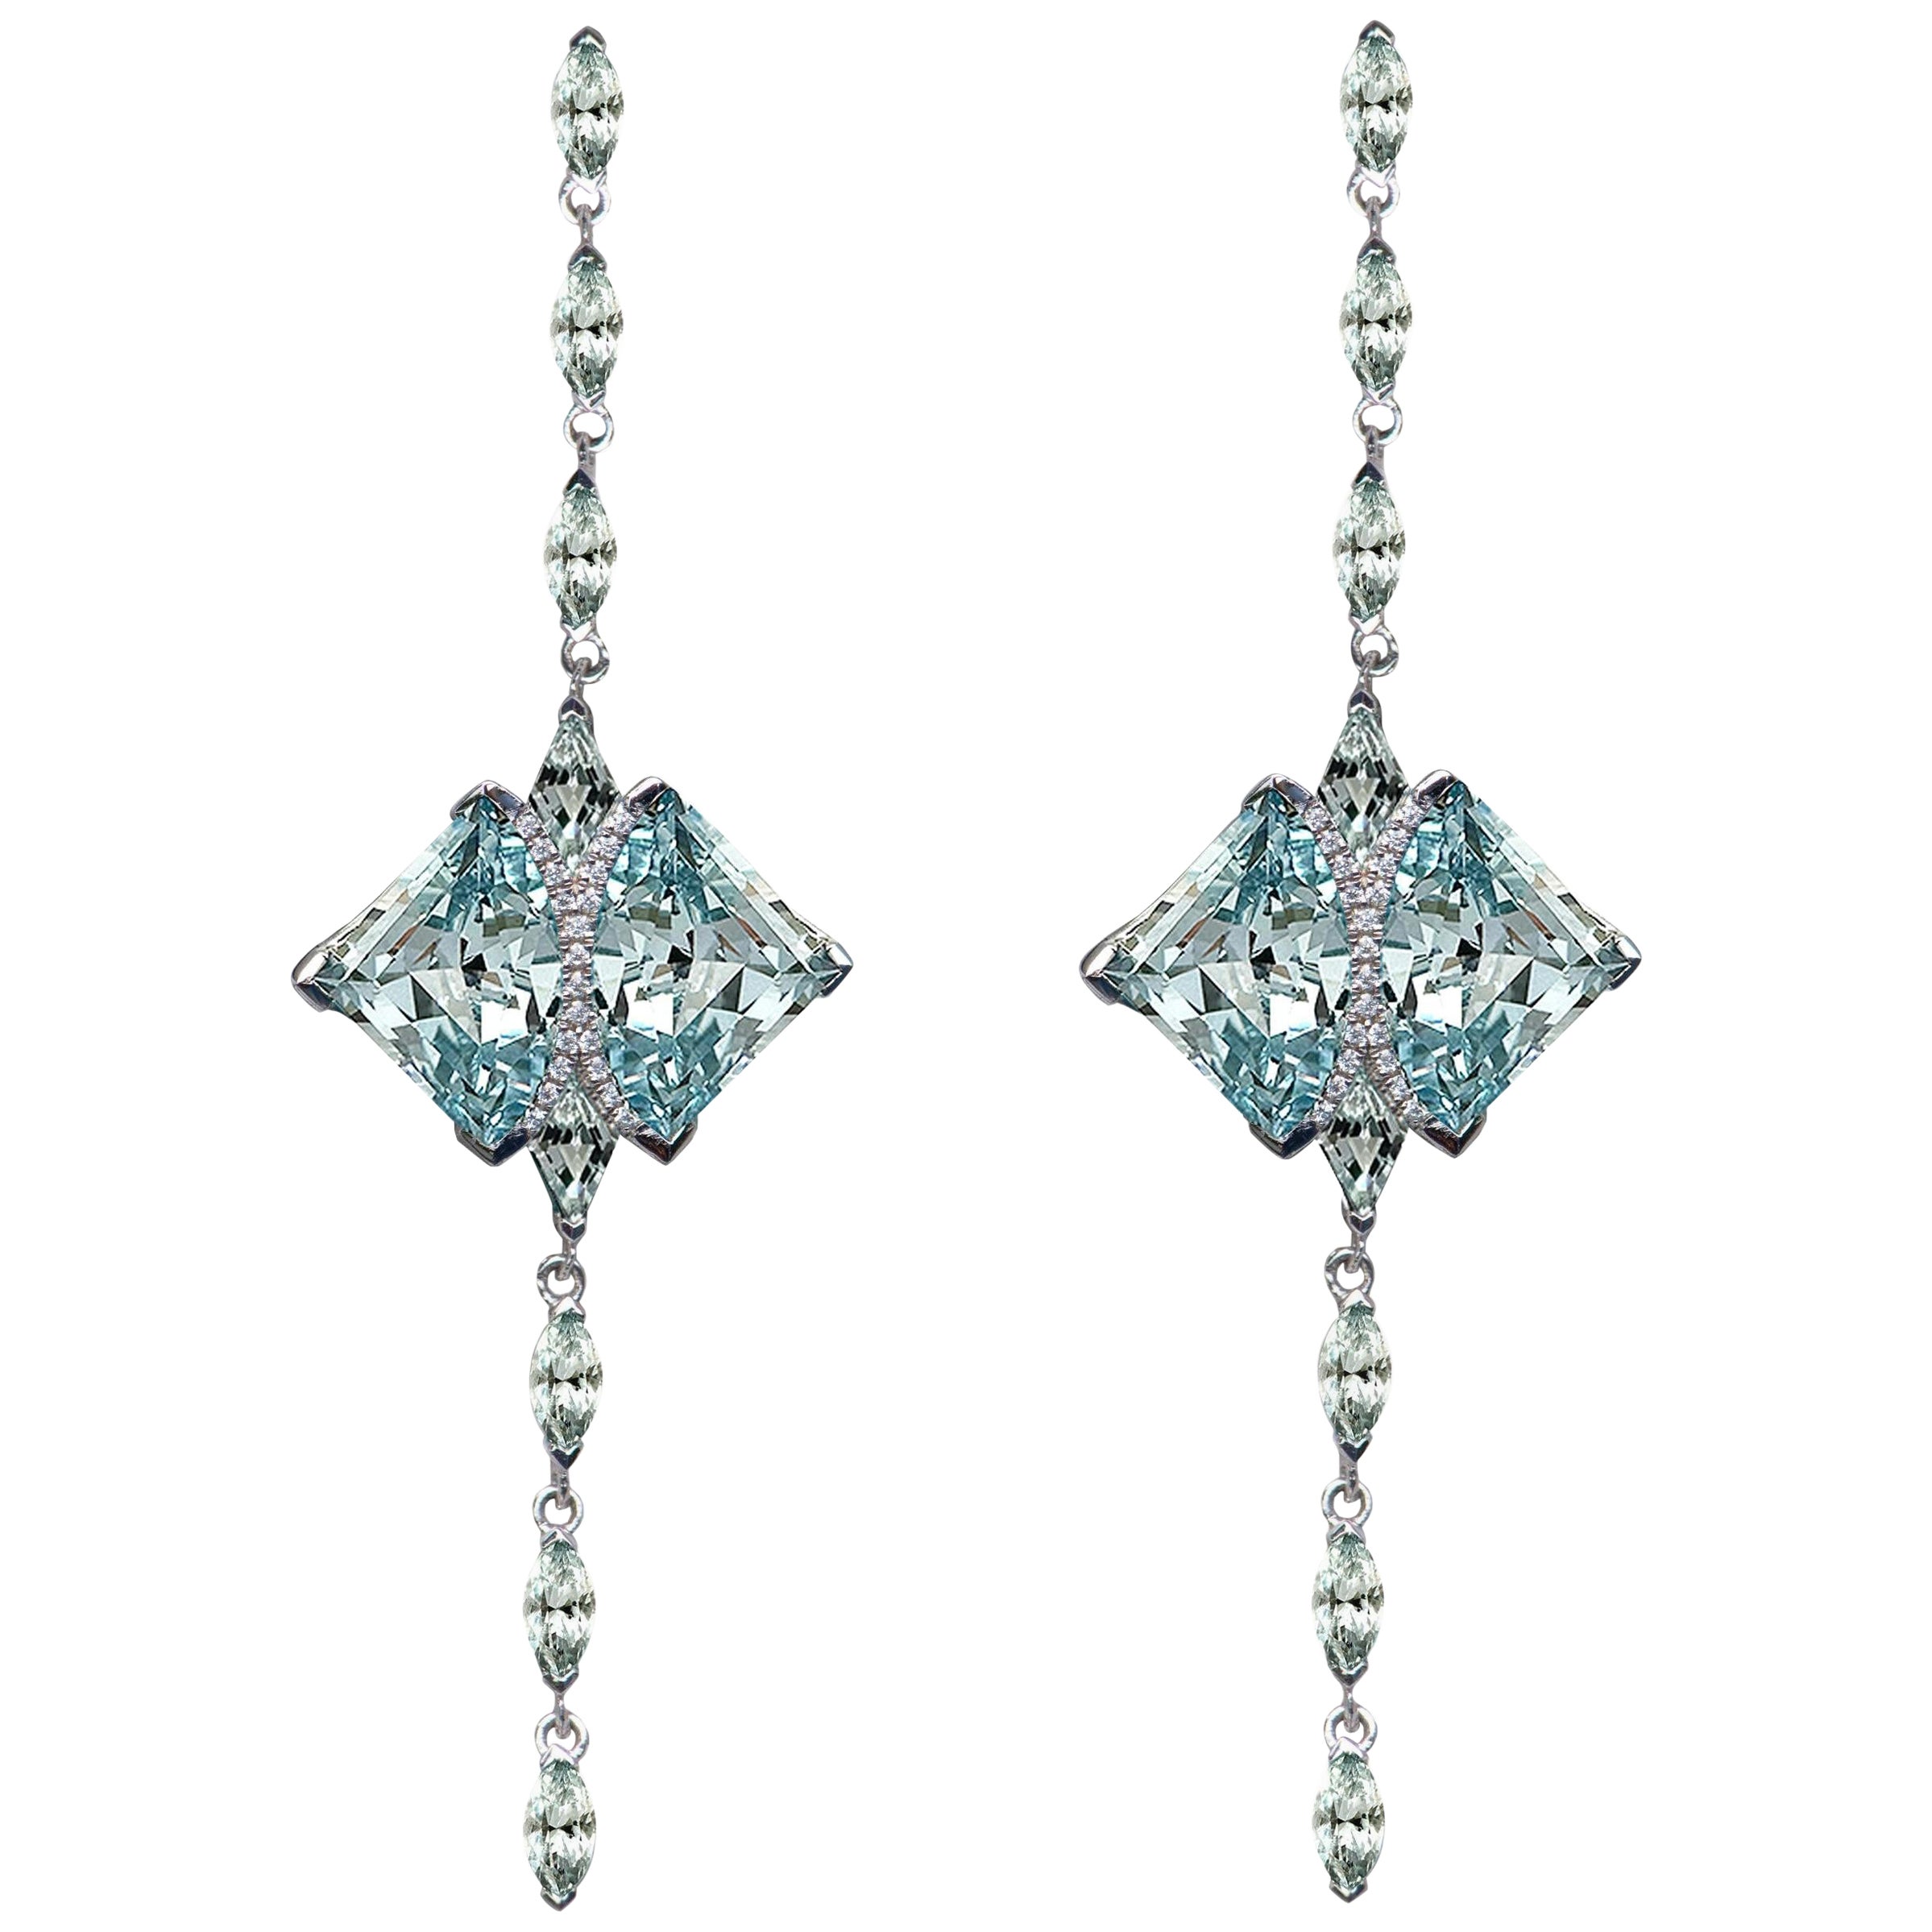 The 20ct Aquamarine Sapphire Eagle Ray Drop Earrings, 14kt White Gold